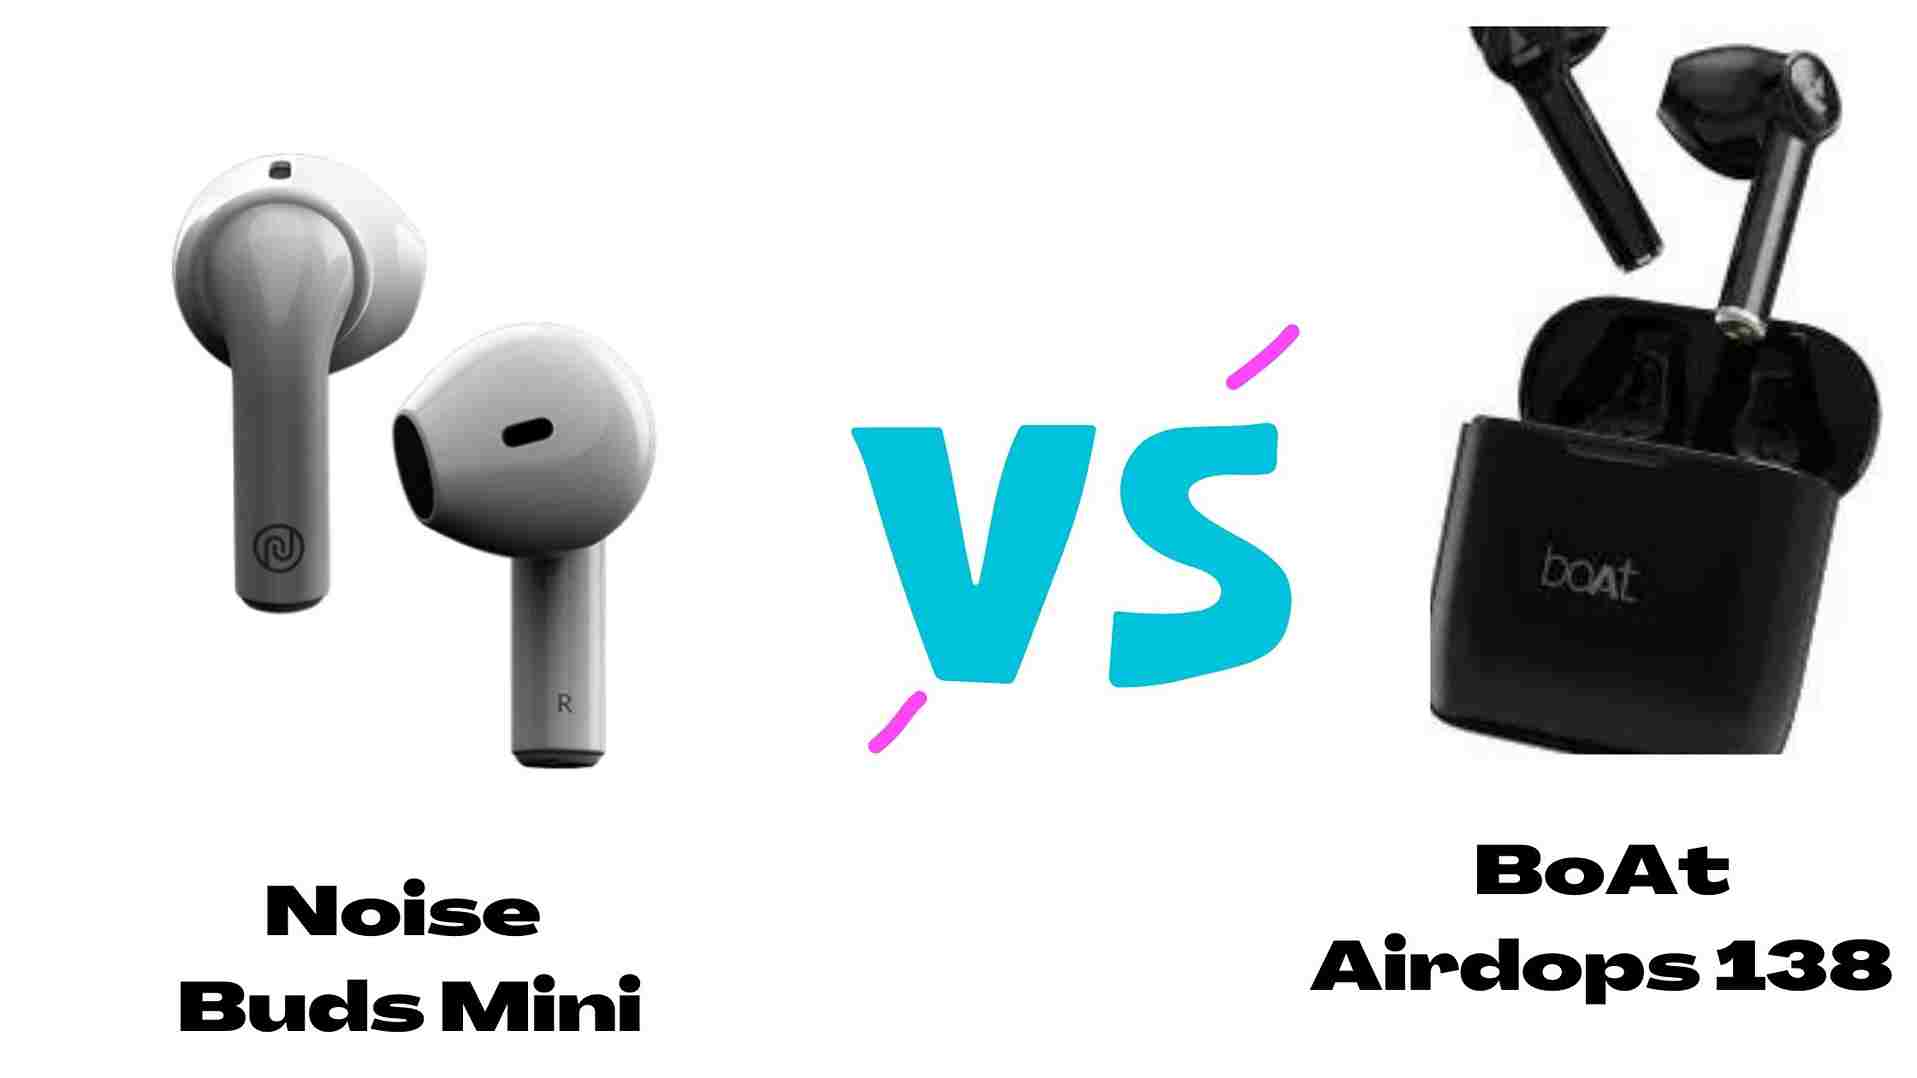 Noise Air Buds Mini vs Boat Airdopes 138